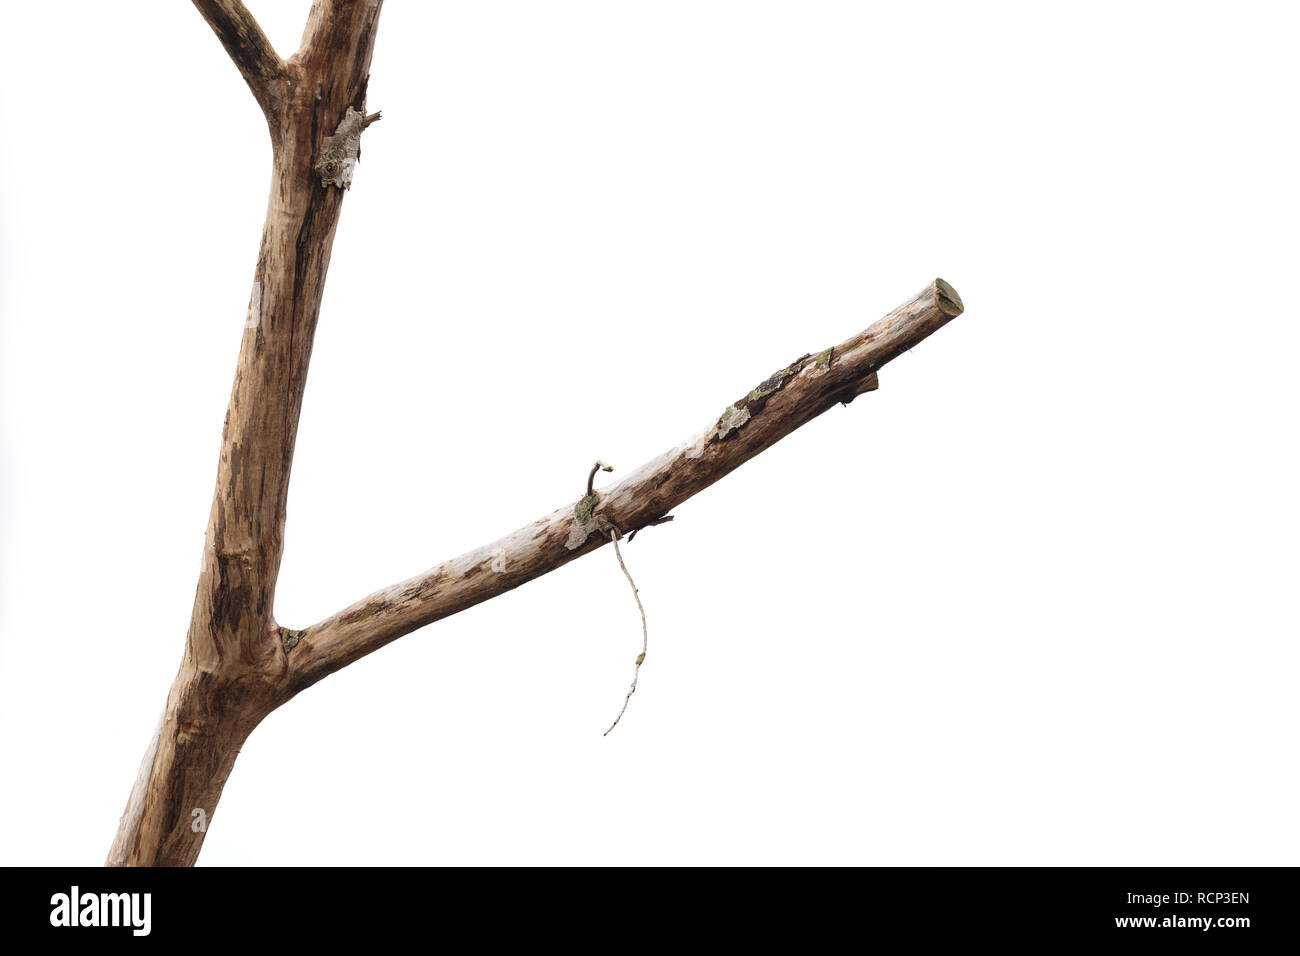 Dry tree branch isolated on white background. Stock Photo